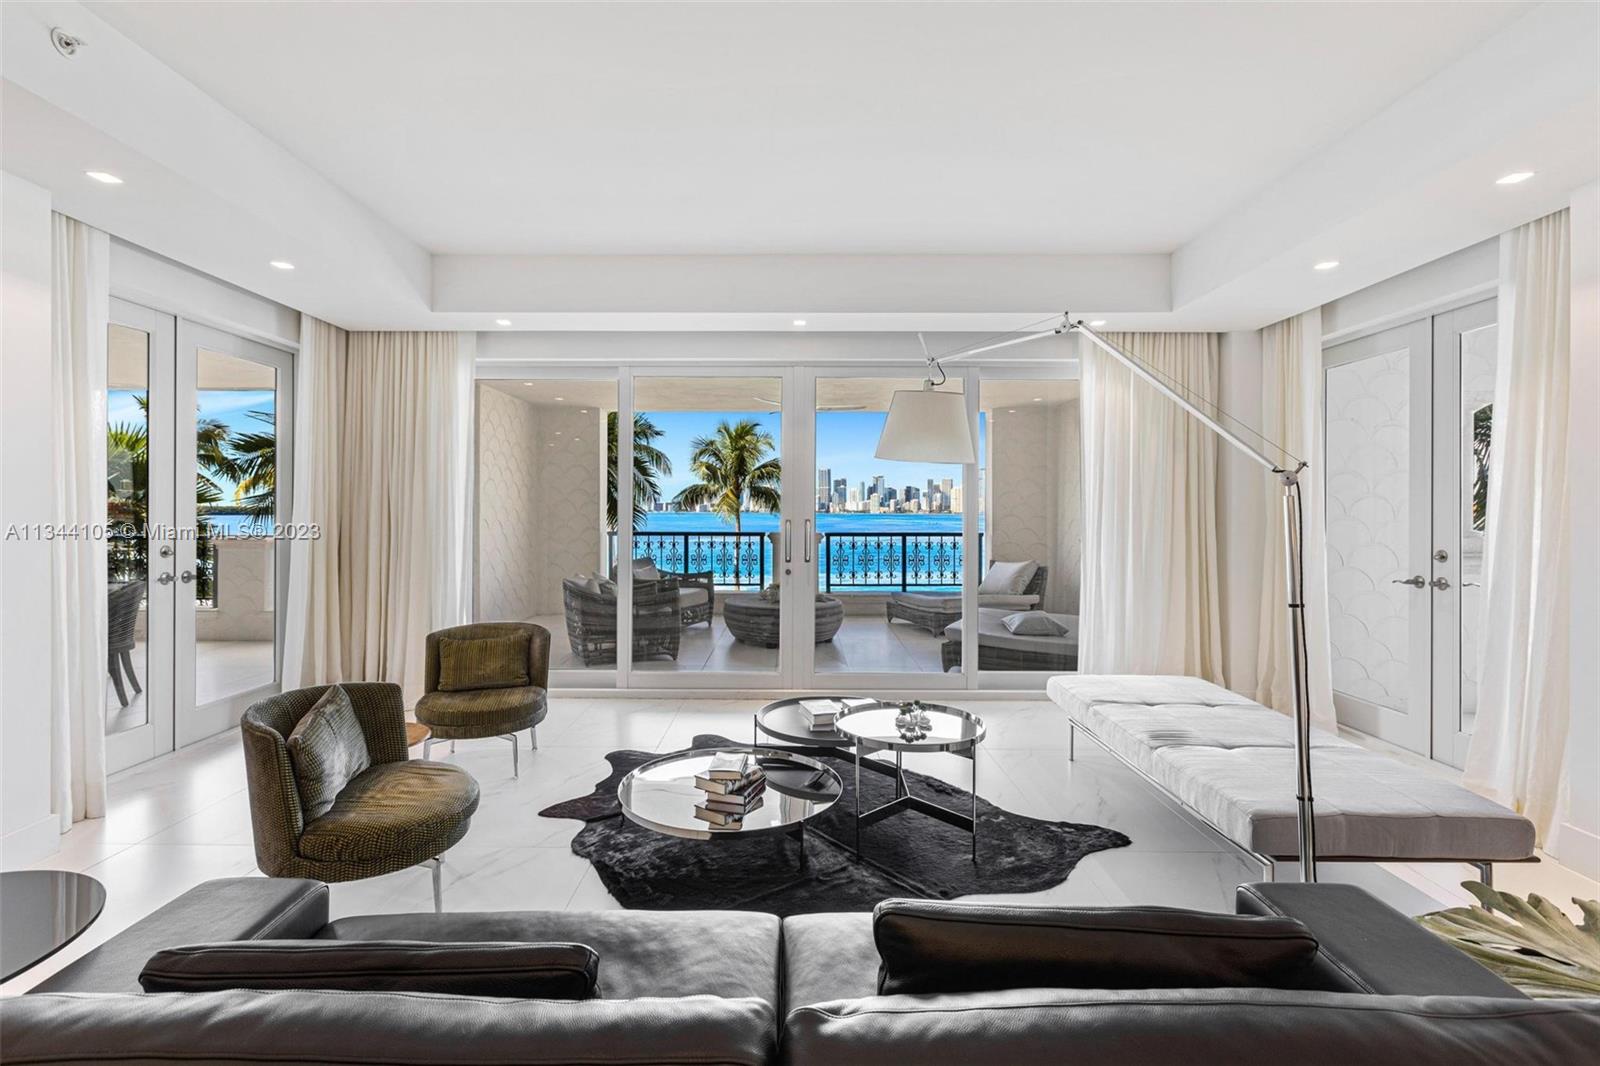 This stunning Bayview rental on Fisher Island has been completely renovated to perfection! It encompasses 3,550 sq. ft. interior, 4 bedrooms, 4.5 baths, expansive terraces overlooking the Miami Downtown skyline and Bay.  Features include an open layout with marble floors throughout, state-of-the-art kitchen and bathrooms, impact glass doors, spacious bedrooms with walk-in closets and many more features. Available starting now through December 15, 2023. Live the Fisher Island lifestyle in this exceptional offering!